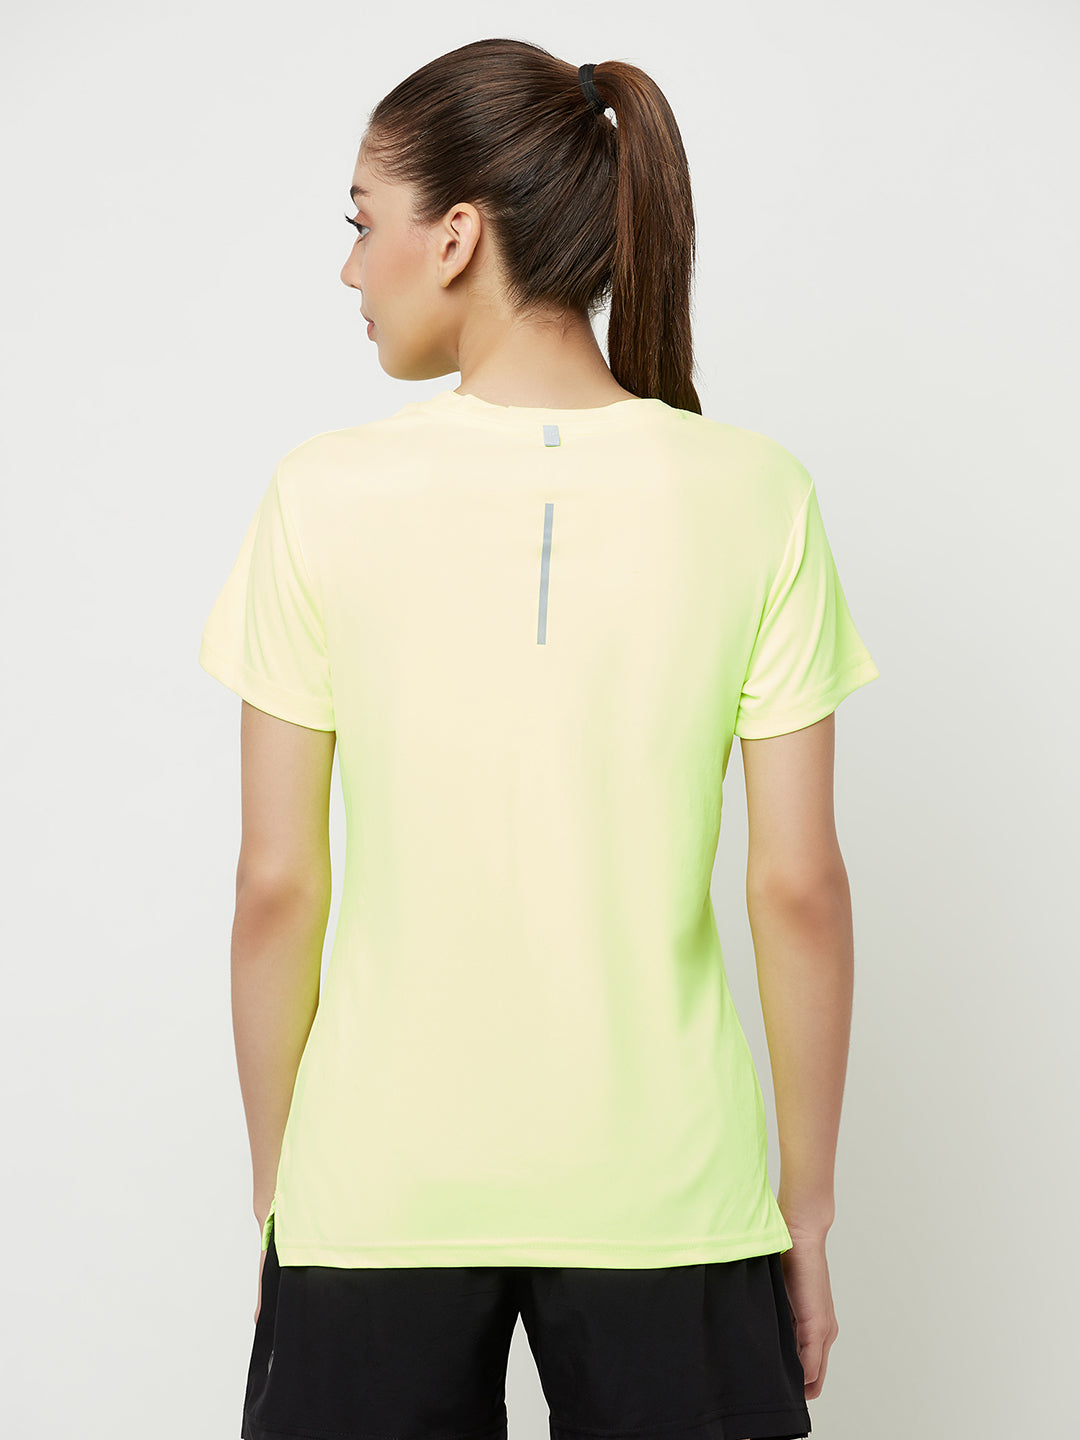 Performance Sports T-shirt - Pack of 2 Black & Neon yellow